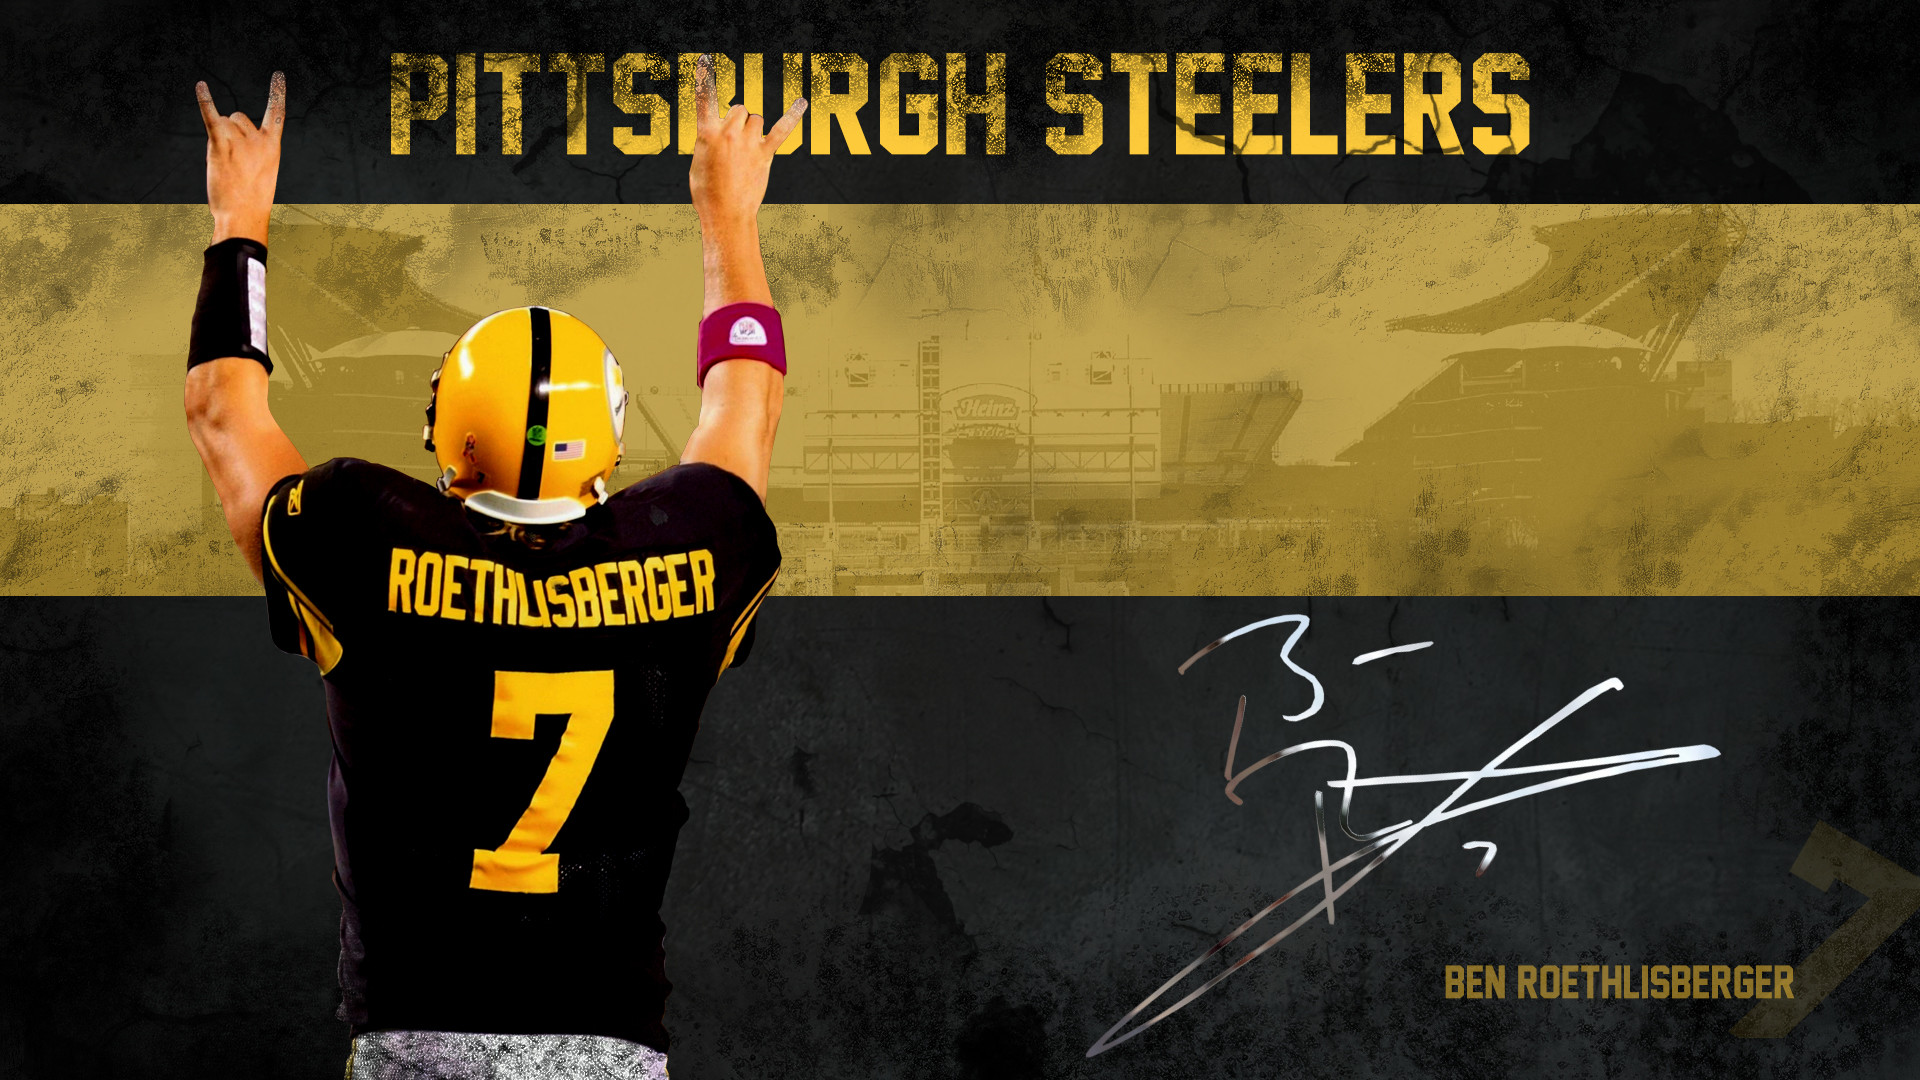 1920x1080 Pittsburgh Steelers images Ben Roethlisberger Wallpaper pittsburgh steelers  34080240 HD wallpaper and background photos